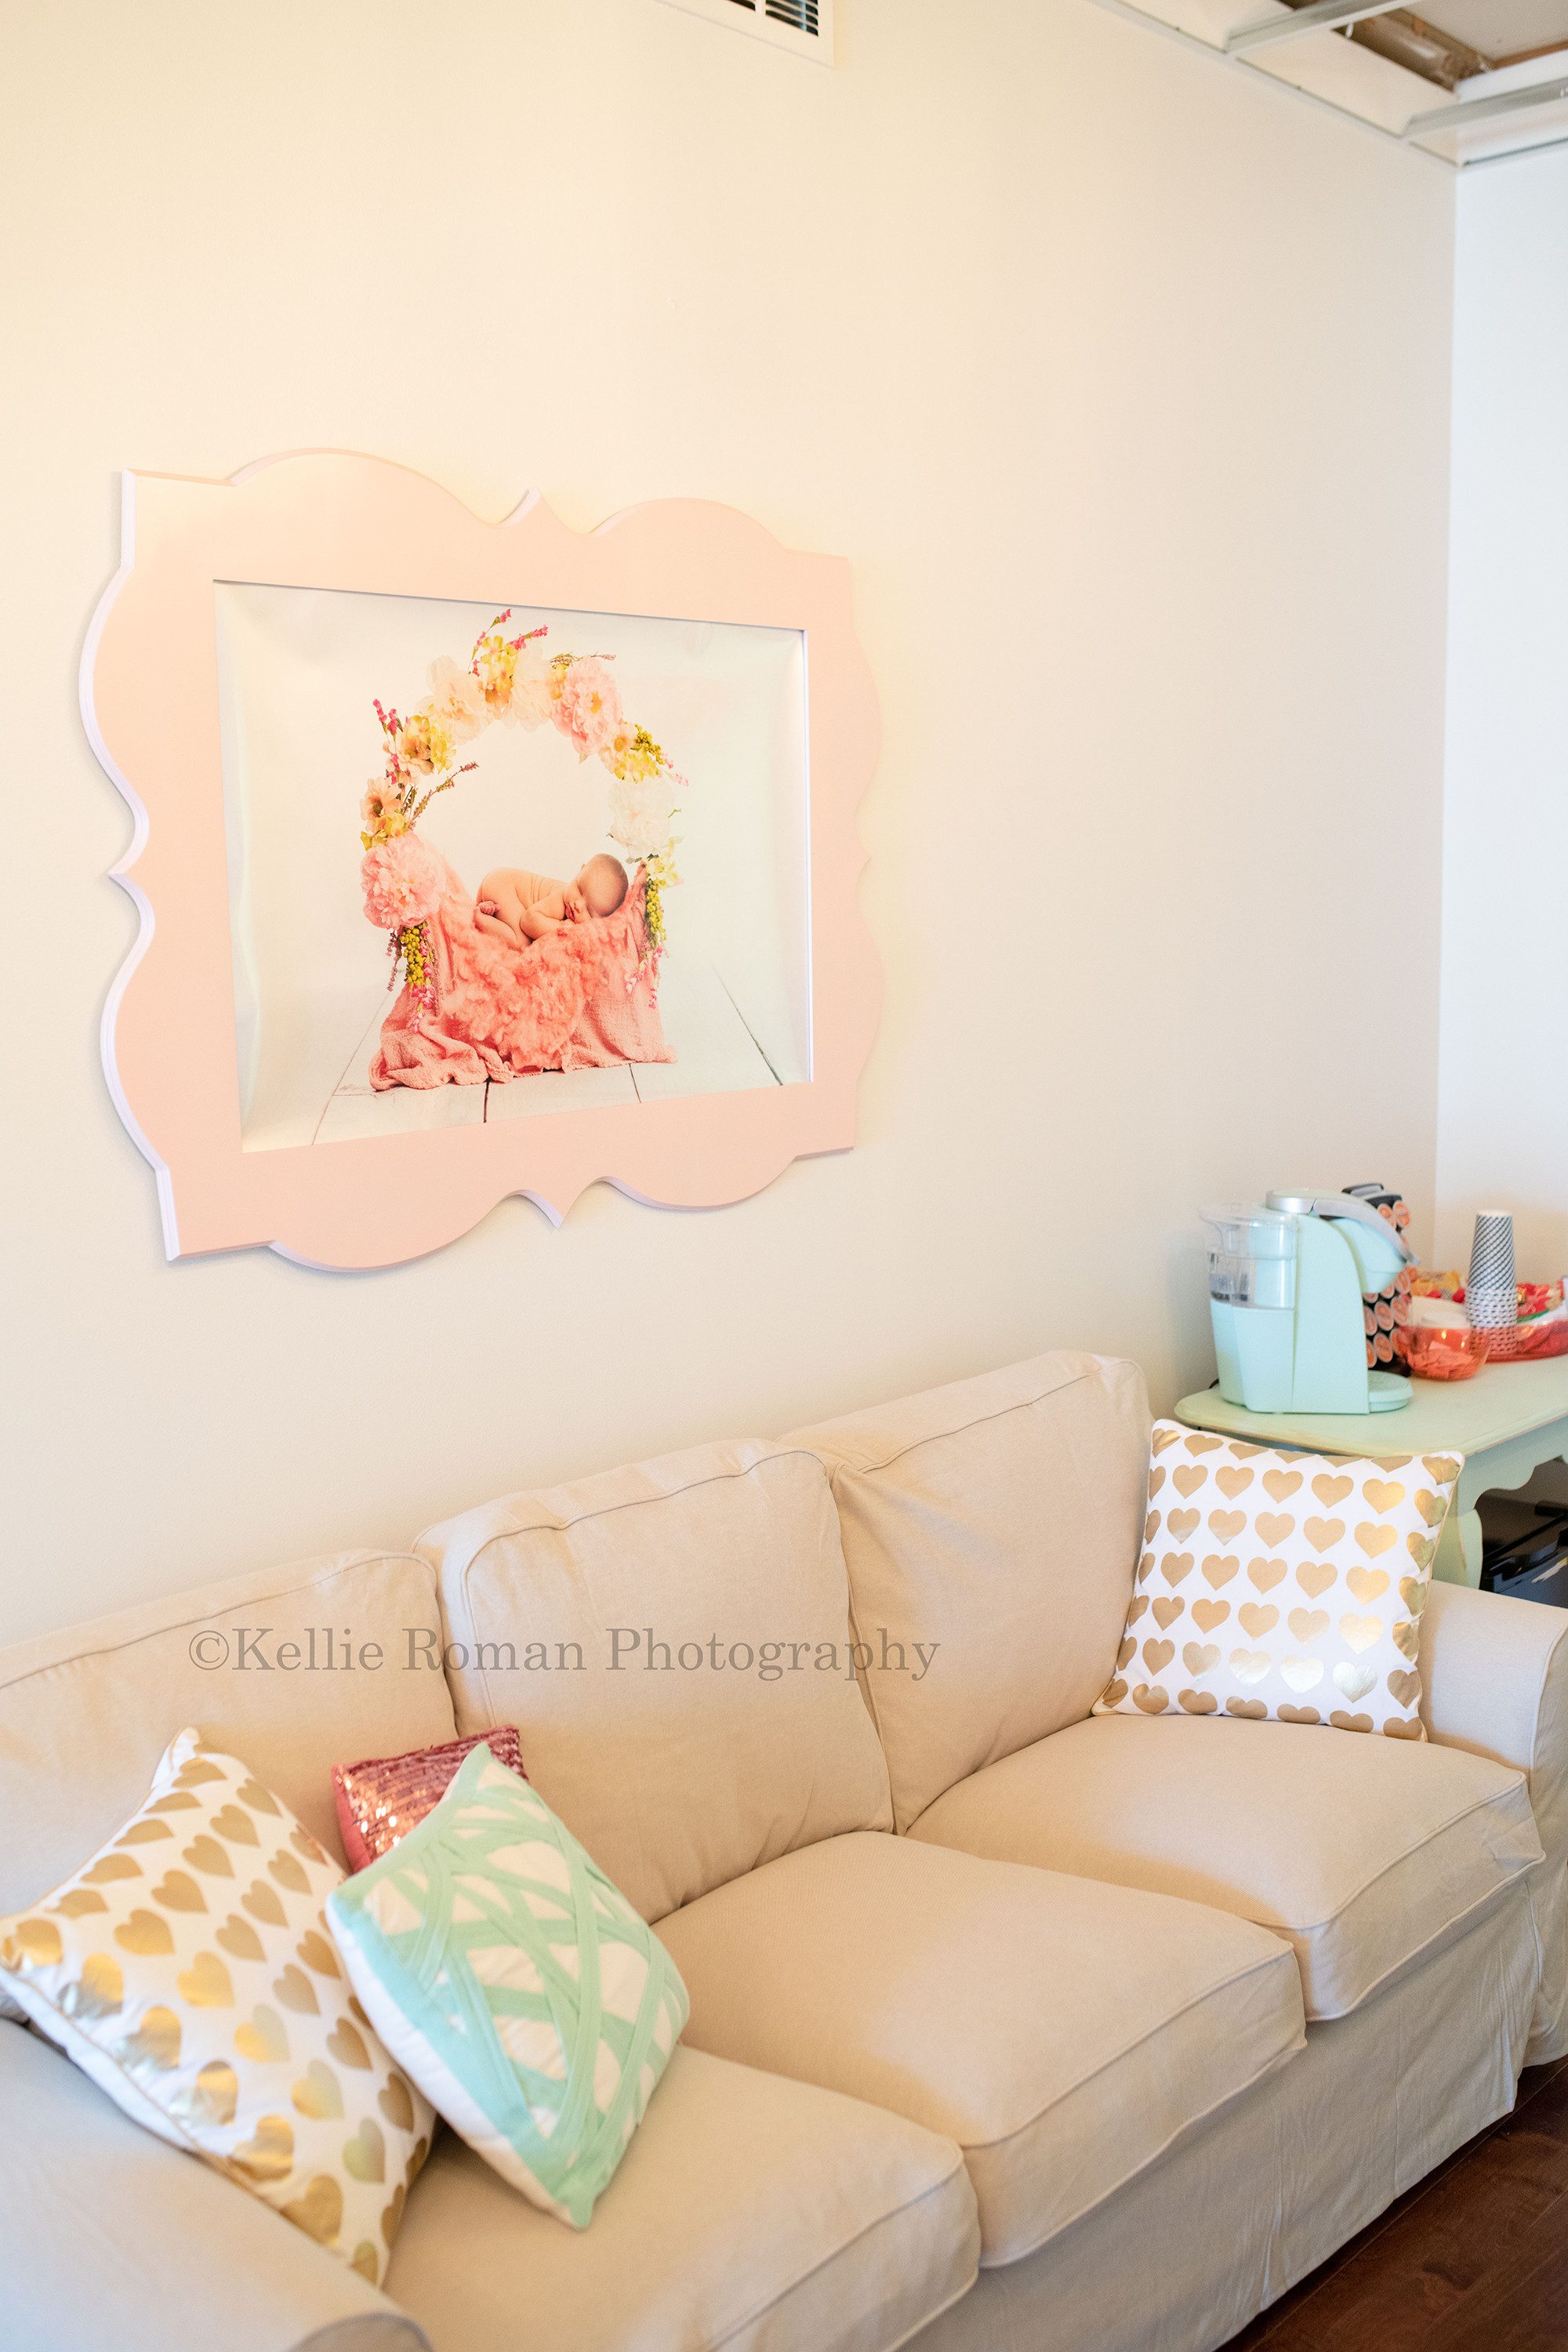 greendale village studio a photographer studio space located in the historic downtown greendale village in milwaukee county the image is a parent lounge with ivory seating area and pastel and gold pillows on top a pink large frame on the wall with a newborn baby photo inside a coffee and snack table is off to the side